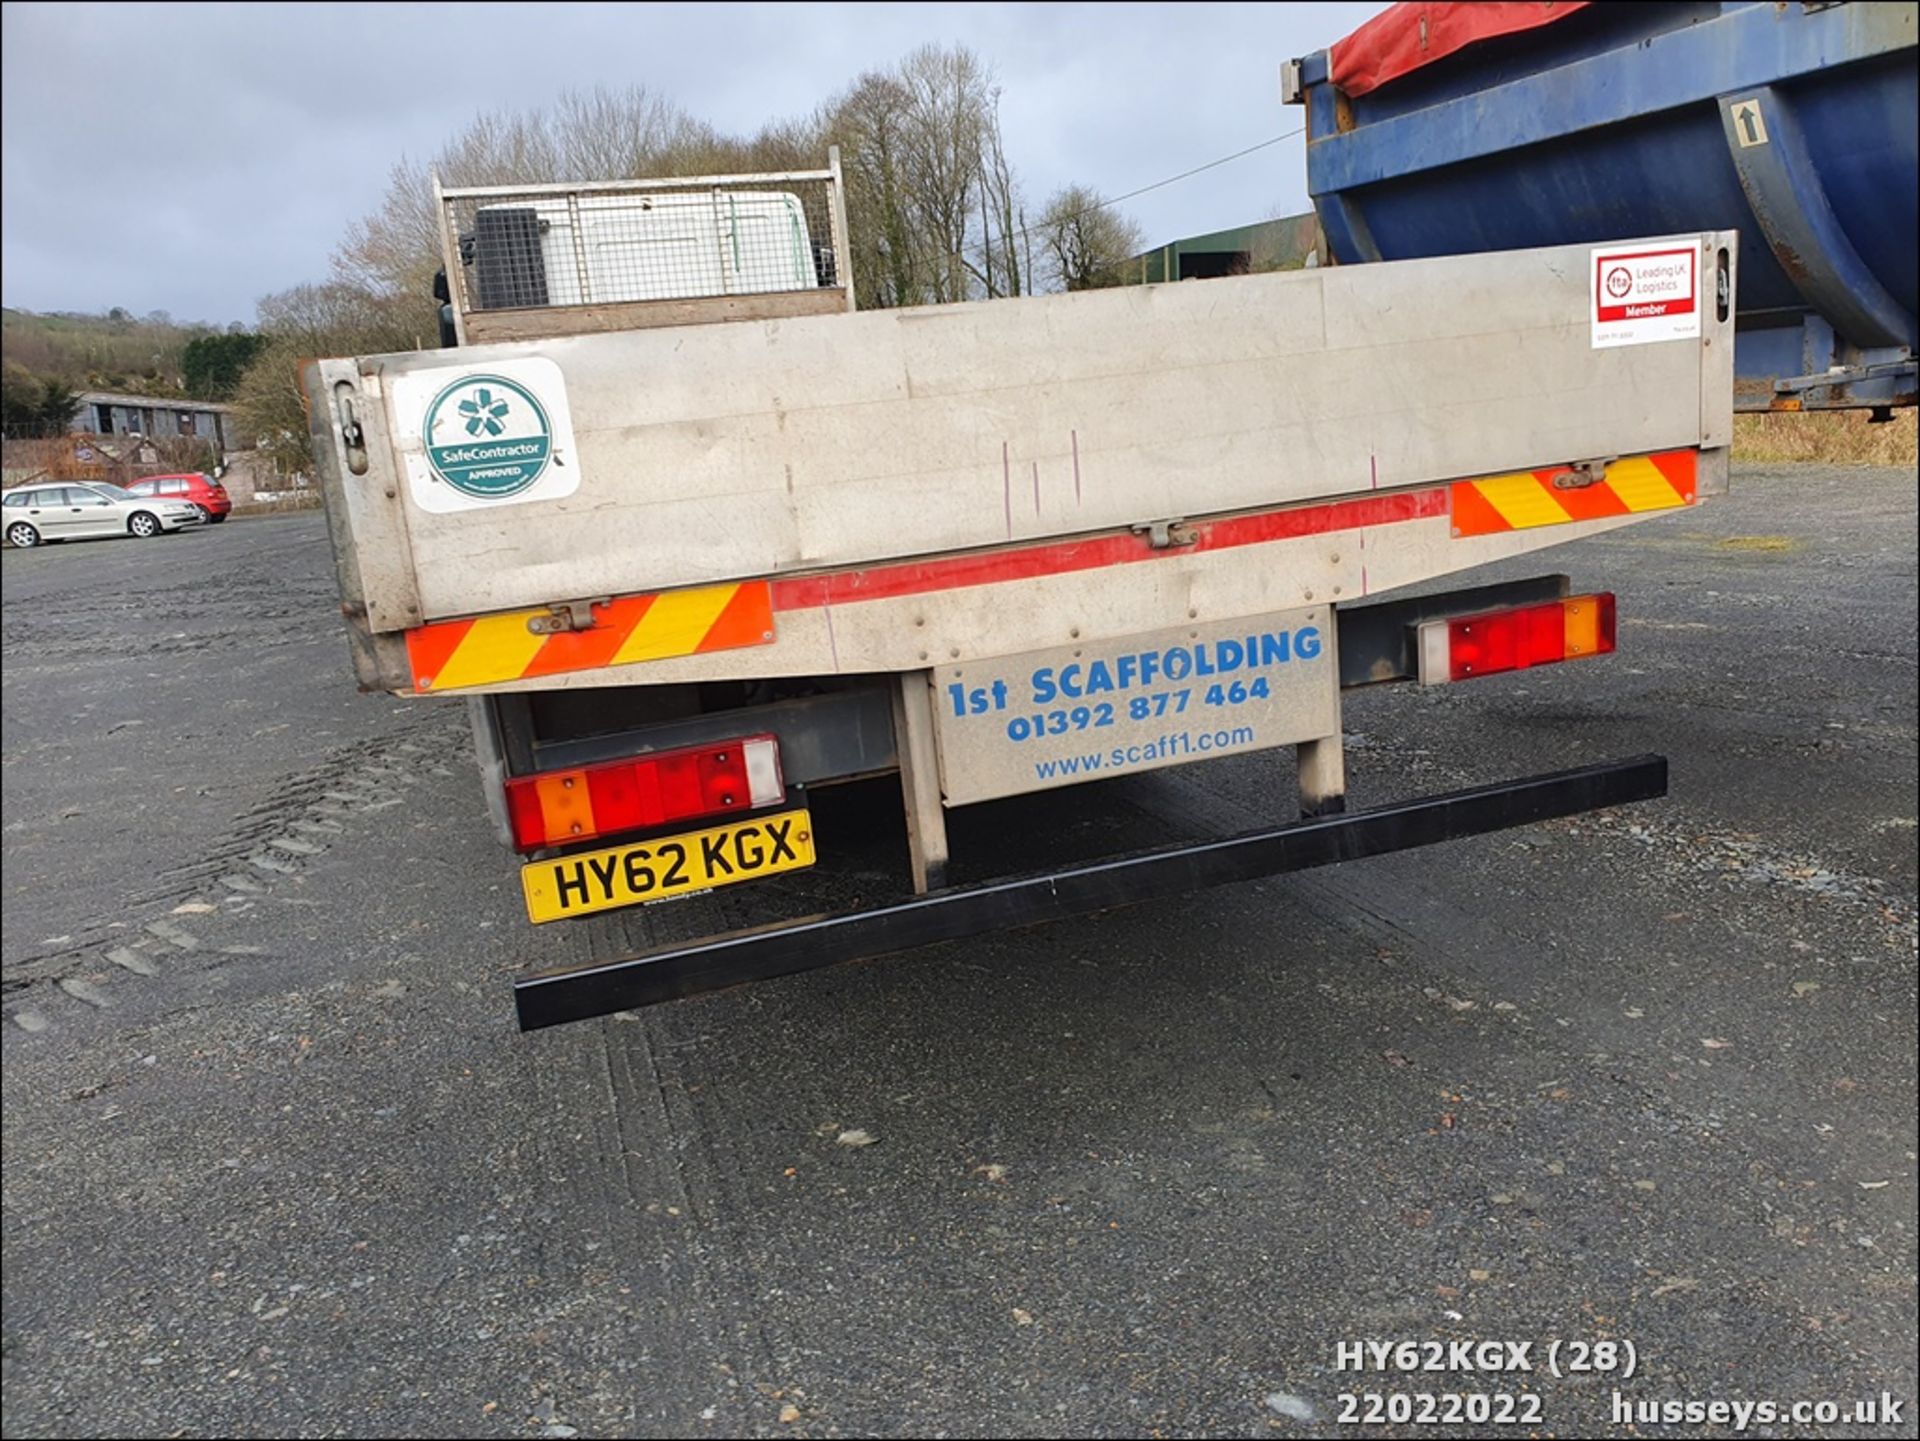 12/62 IVECO STRALIS - 7790cc 2dr Flat Bed (White) - Image 28 of 28